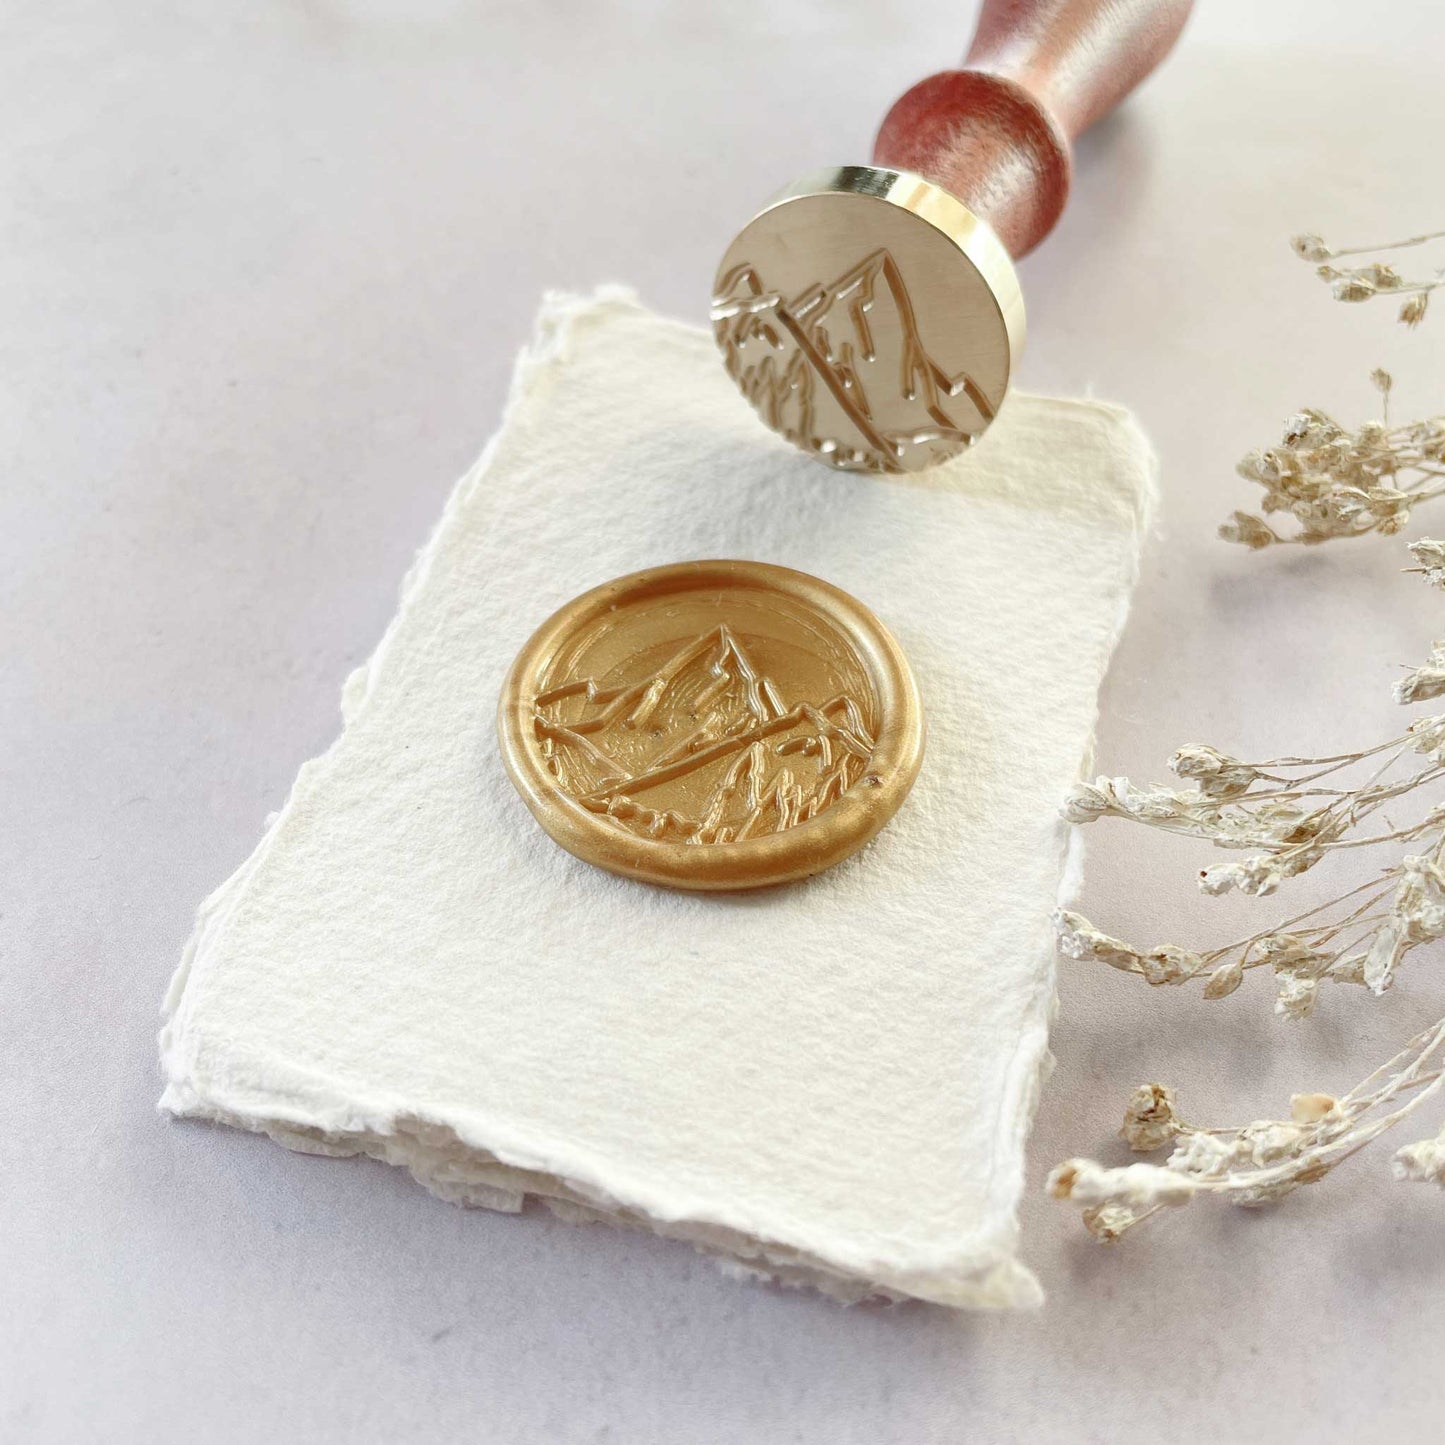 Mountain theme sealing wax stamp.  Make outdoor theme wax seals with this nature inspired stamp from The Natural Paper Company